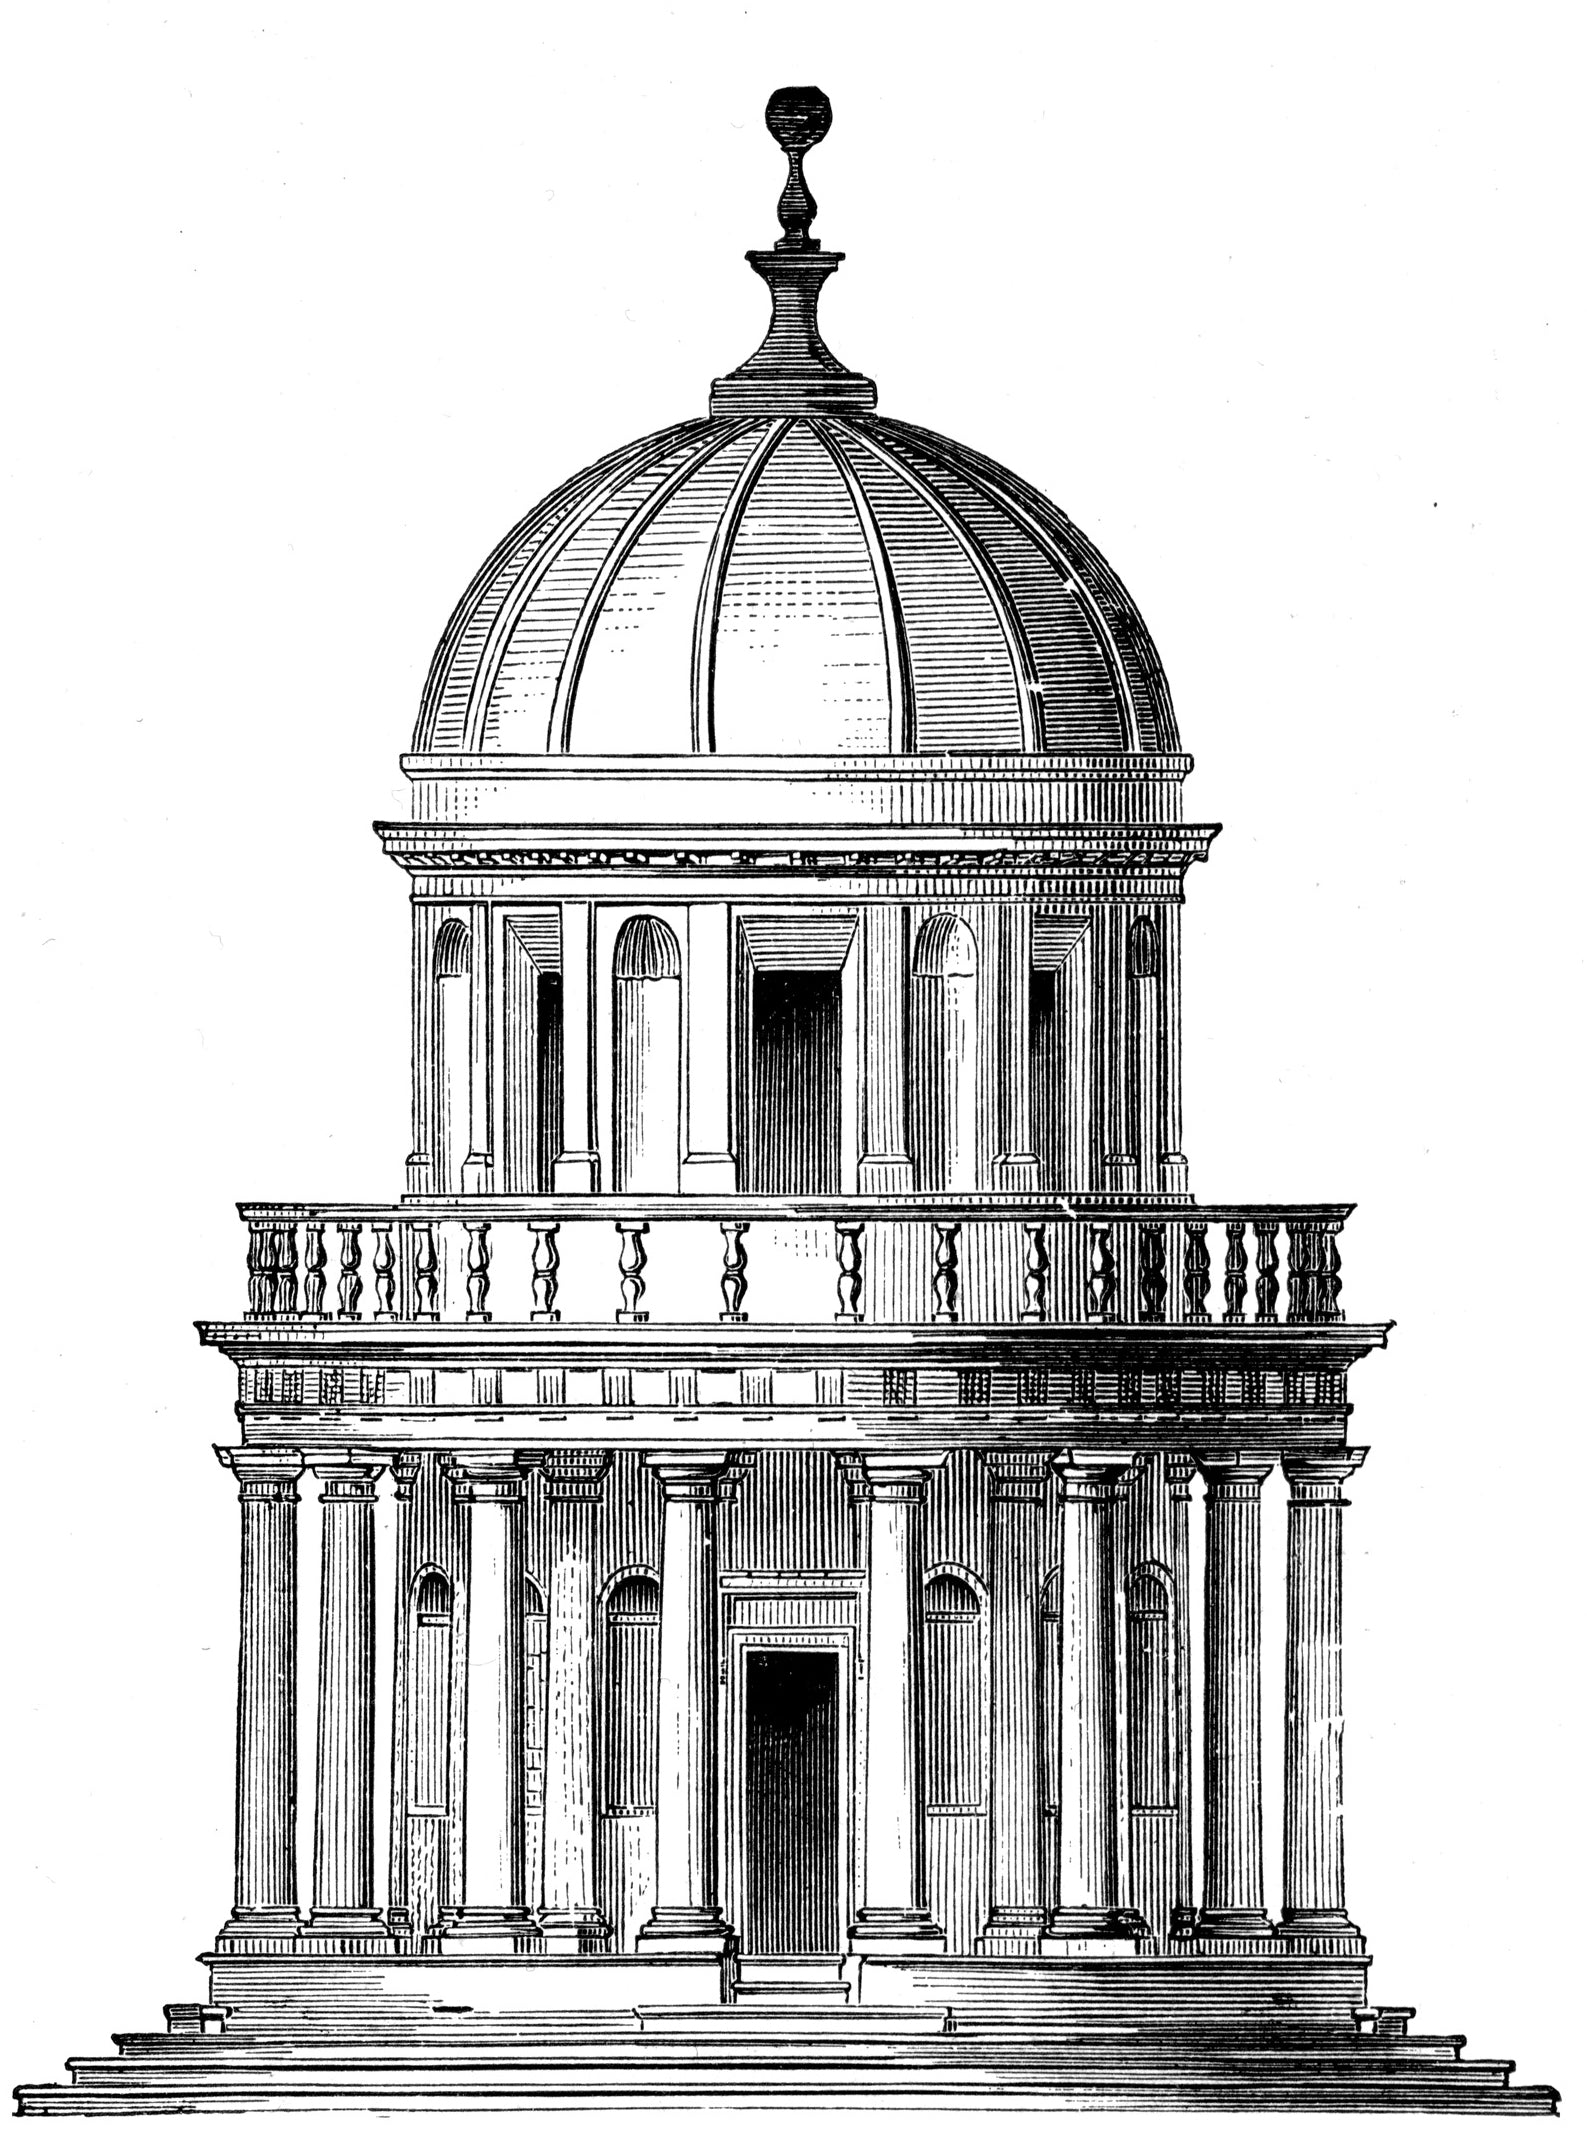 dome black and white classical sketch for brockwell incorporated's illustrated glossary of architectural terms